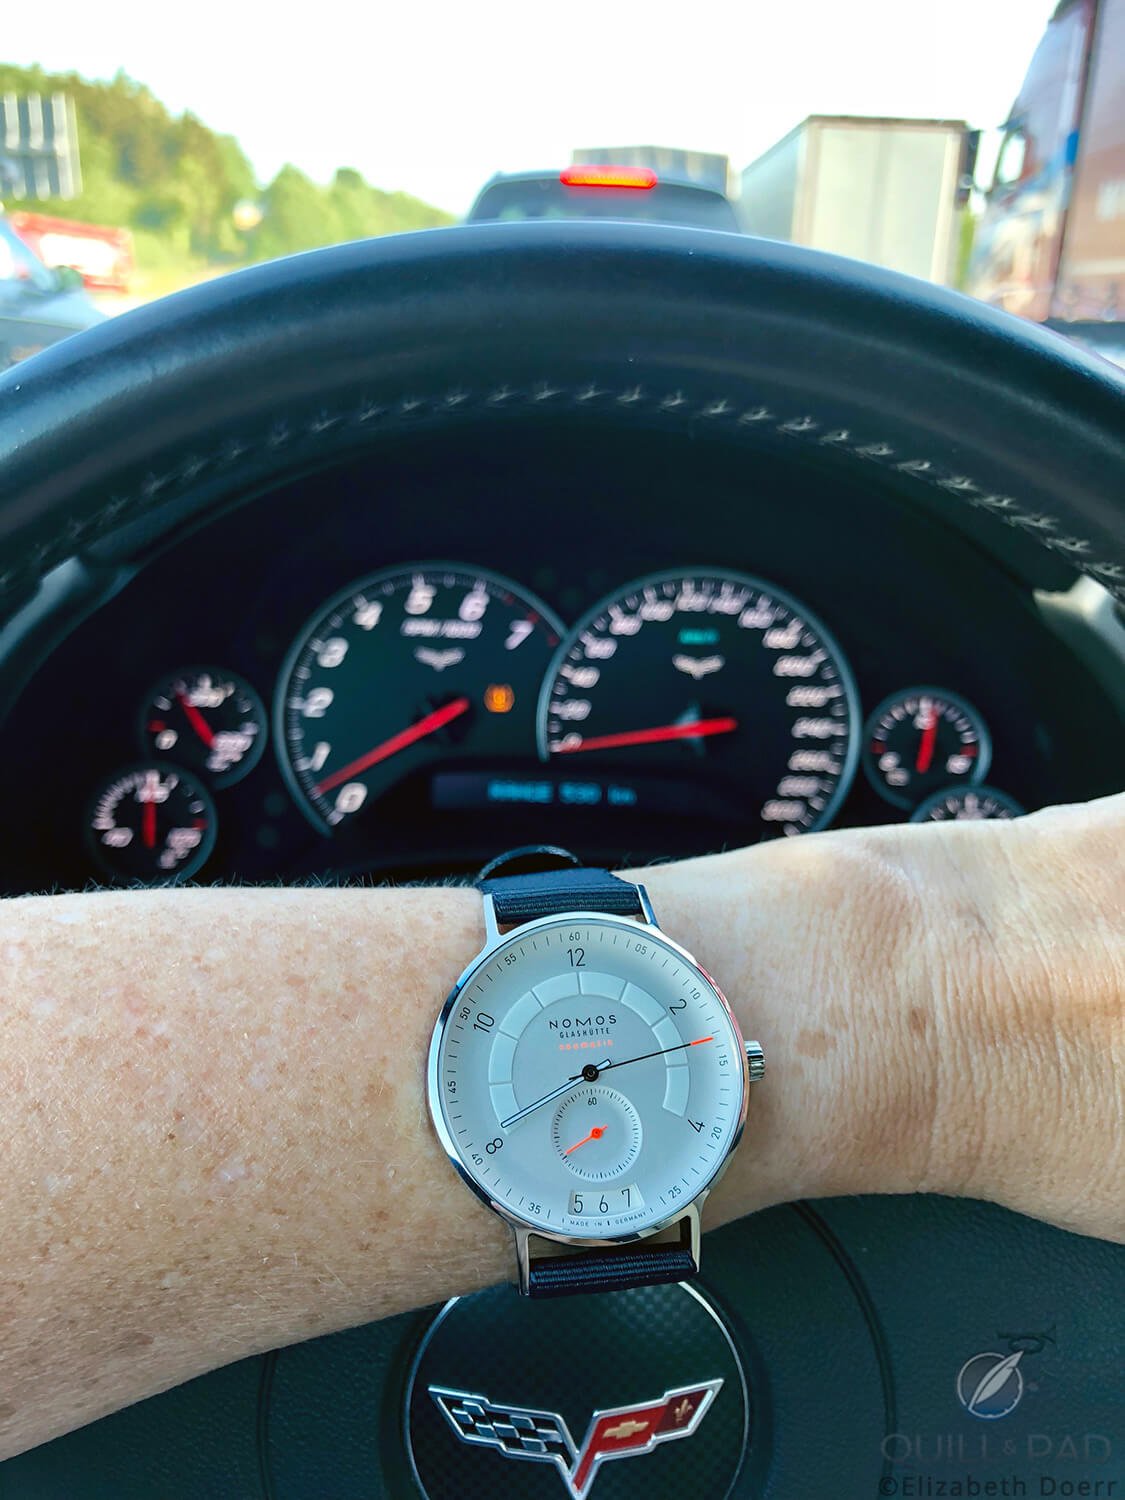 Nomos Glashütte’s Autobahn performs admirably as a drive watch, even during traffic jams